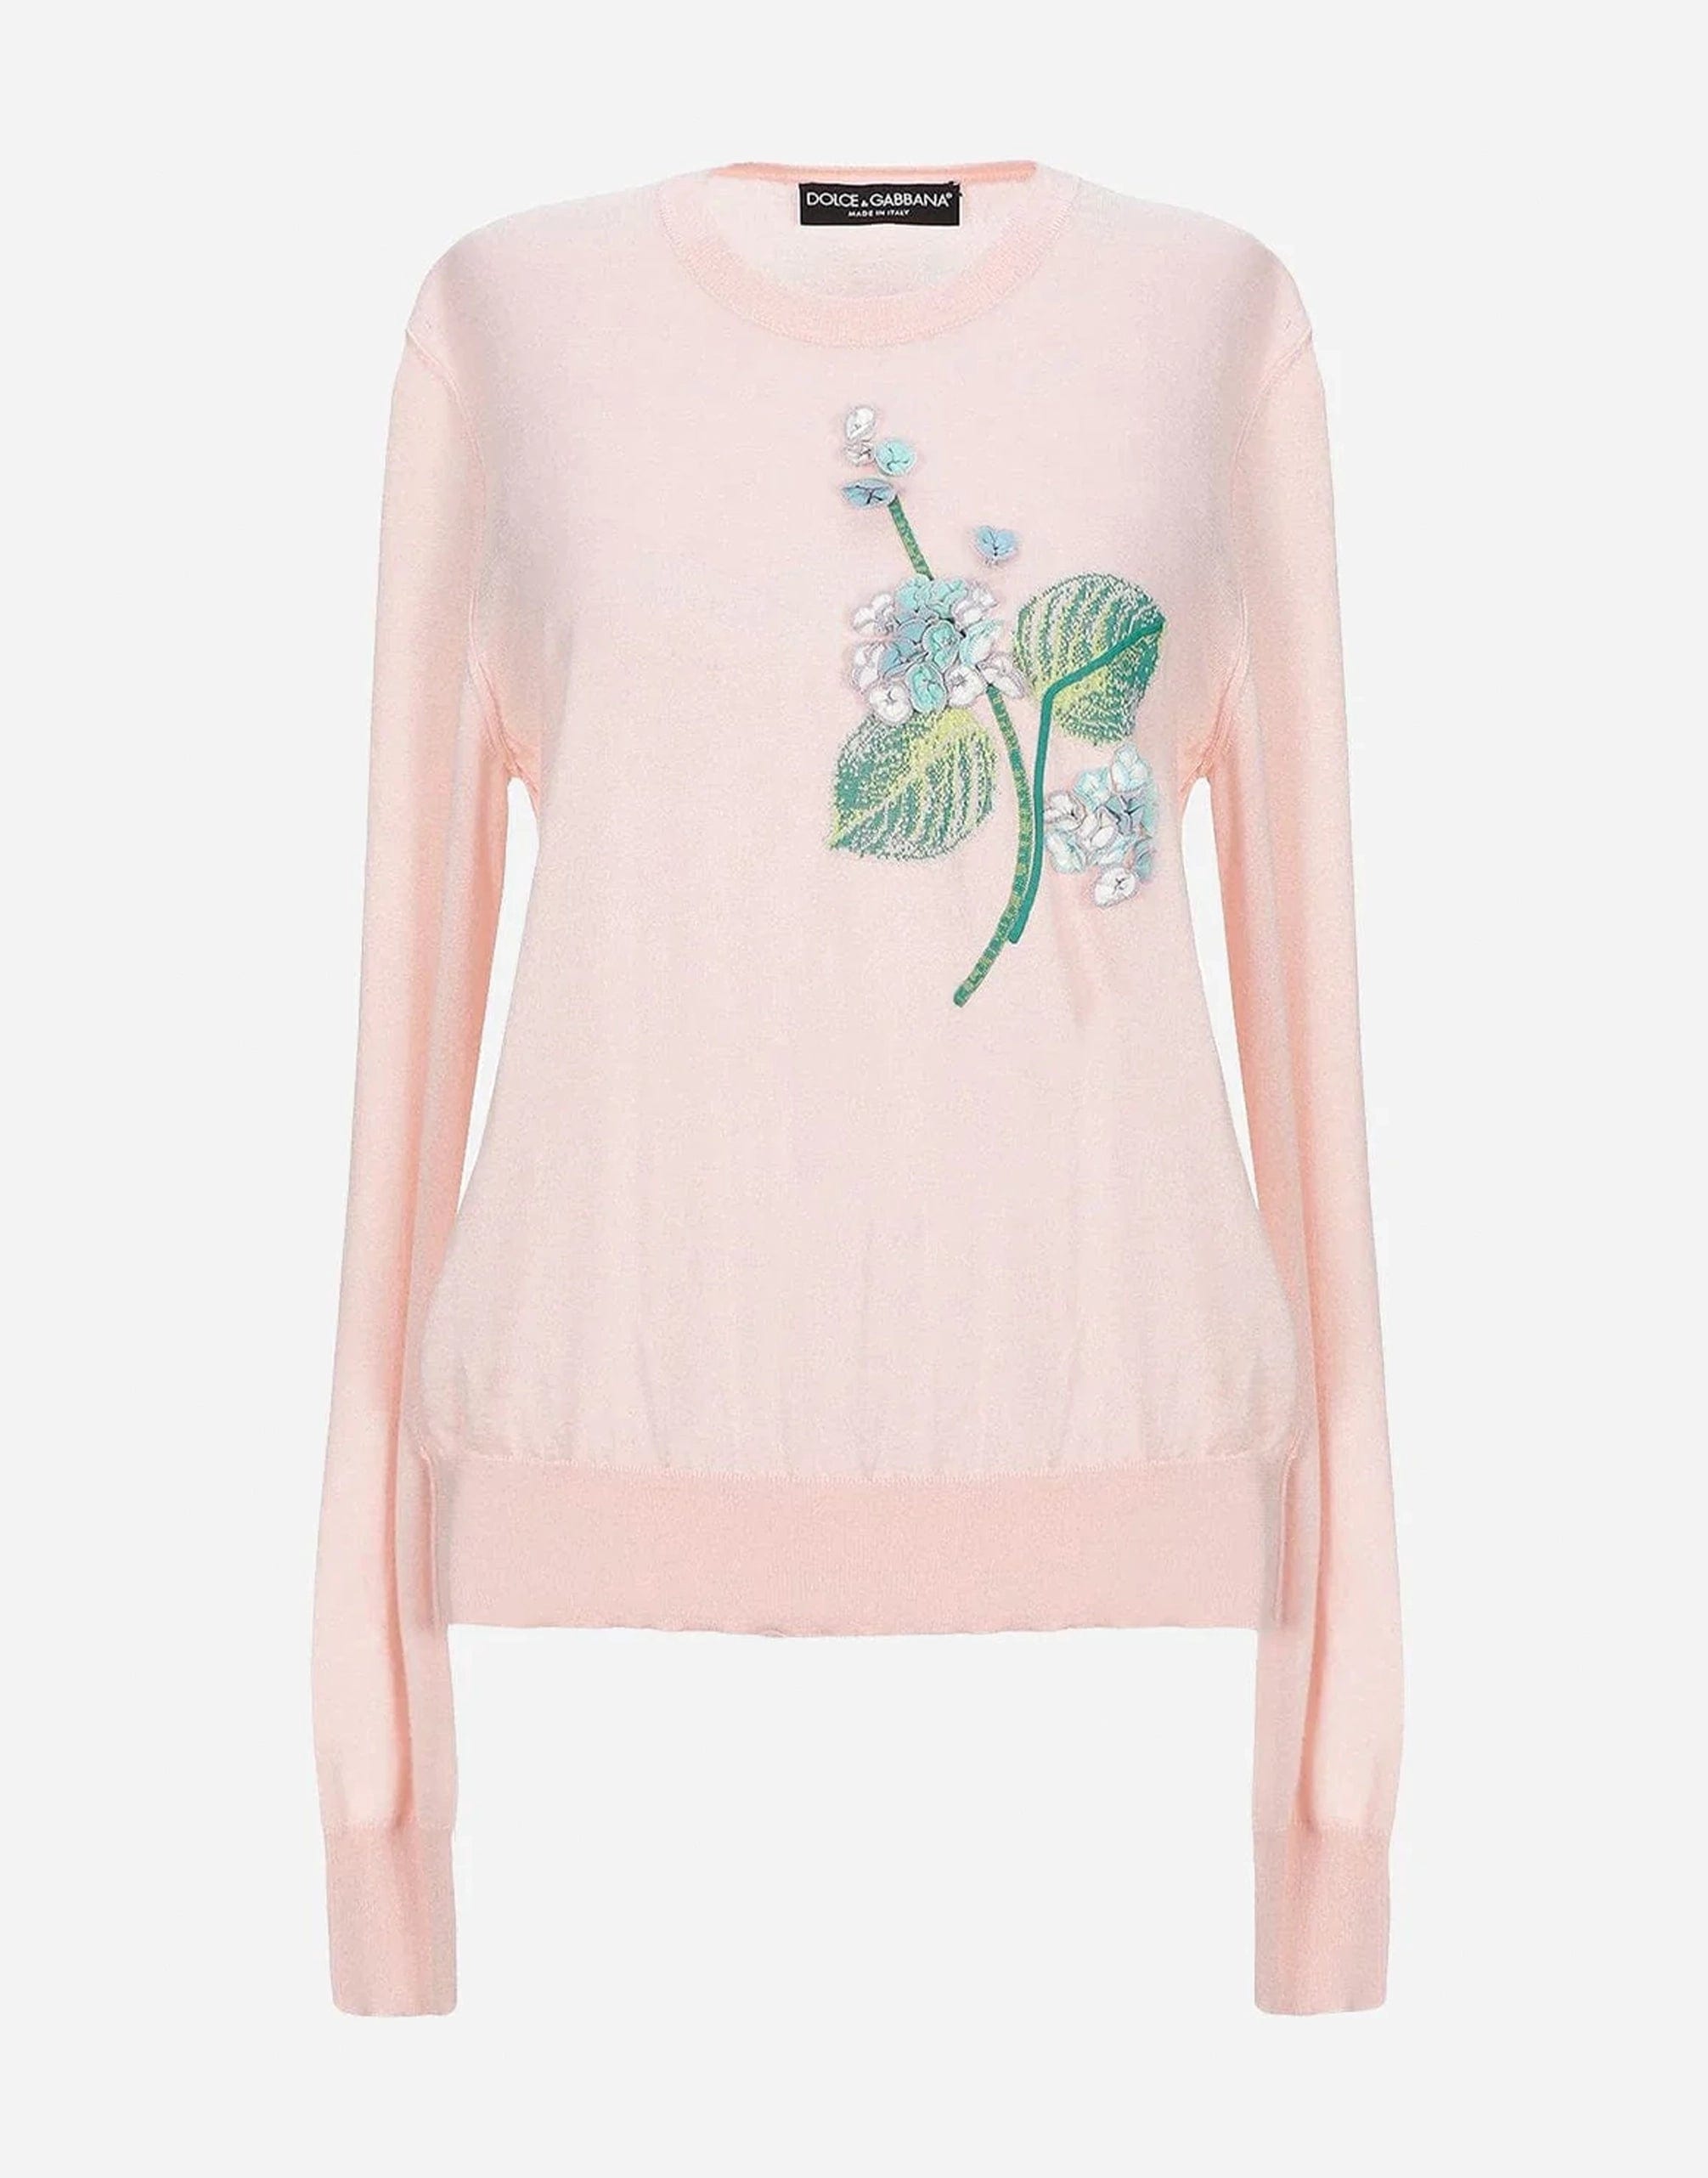 Dolce & Gabbana Floral-Embroidery Cashmere Sweater